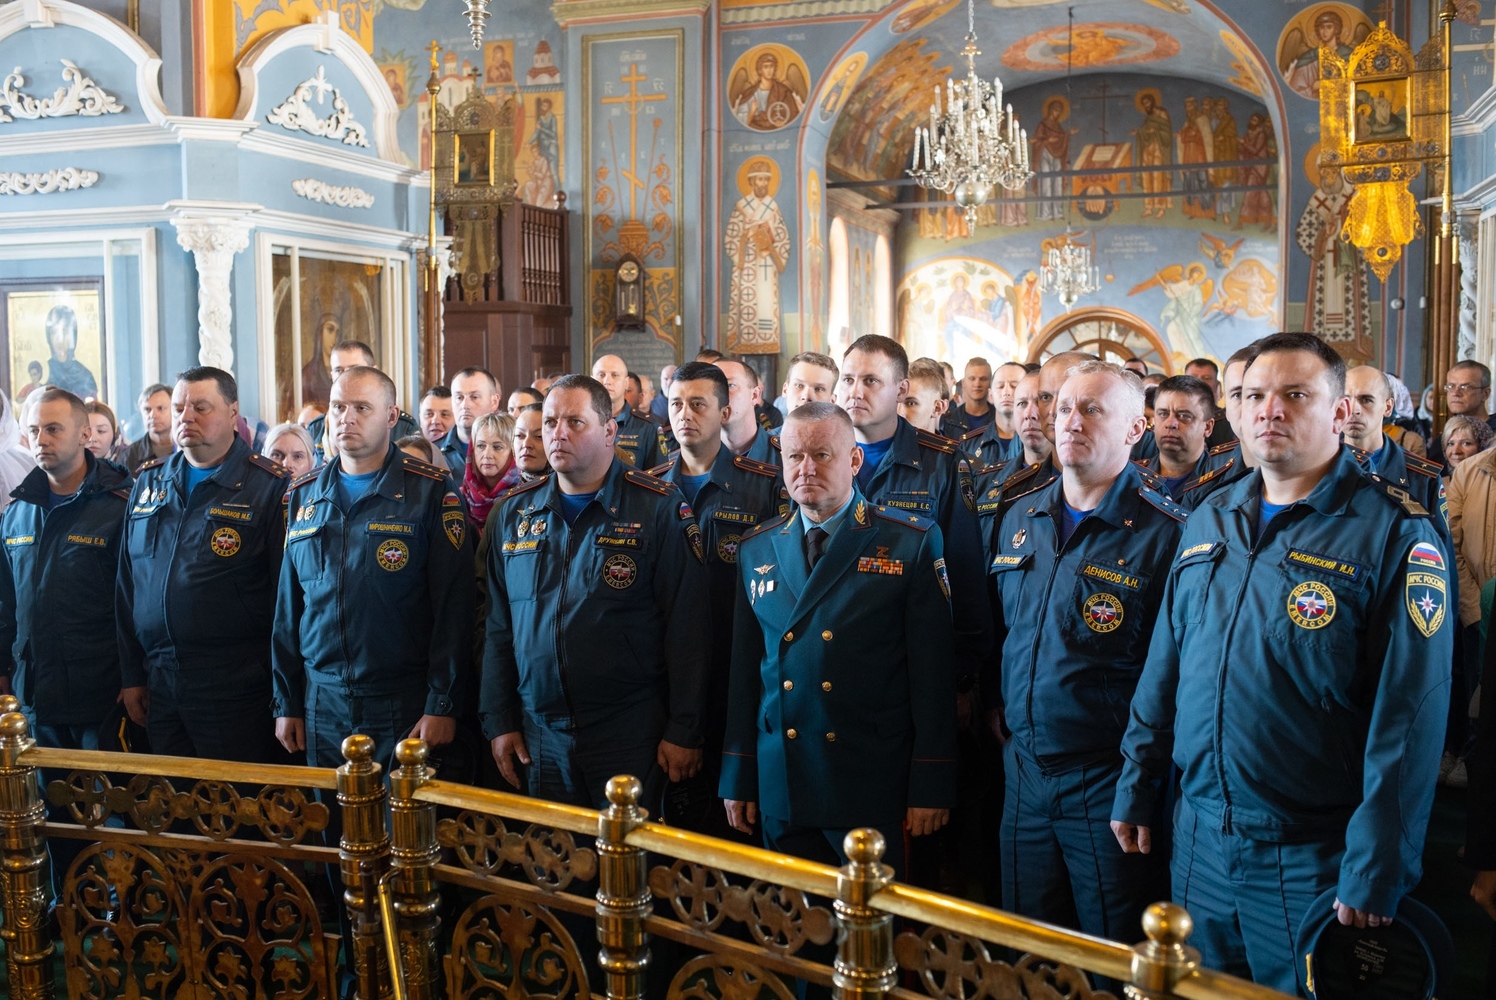 In Kostroma, the leadership of the Ministry of Emergency Situations took part in the Divine Liturgy